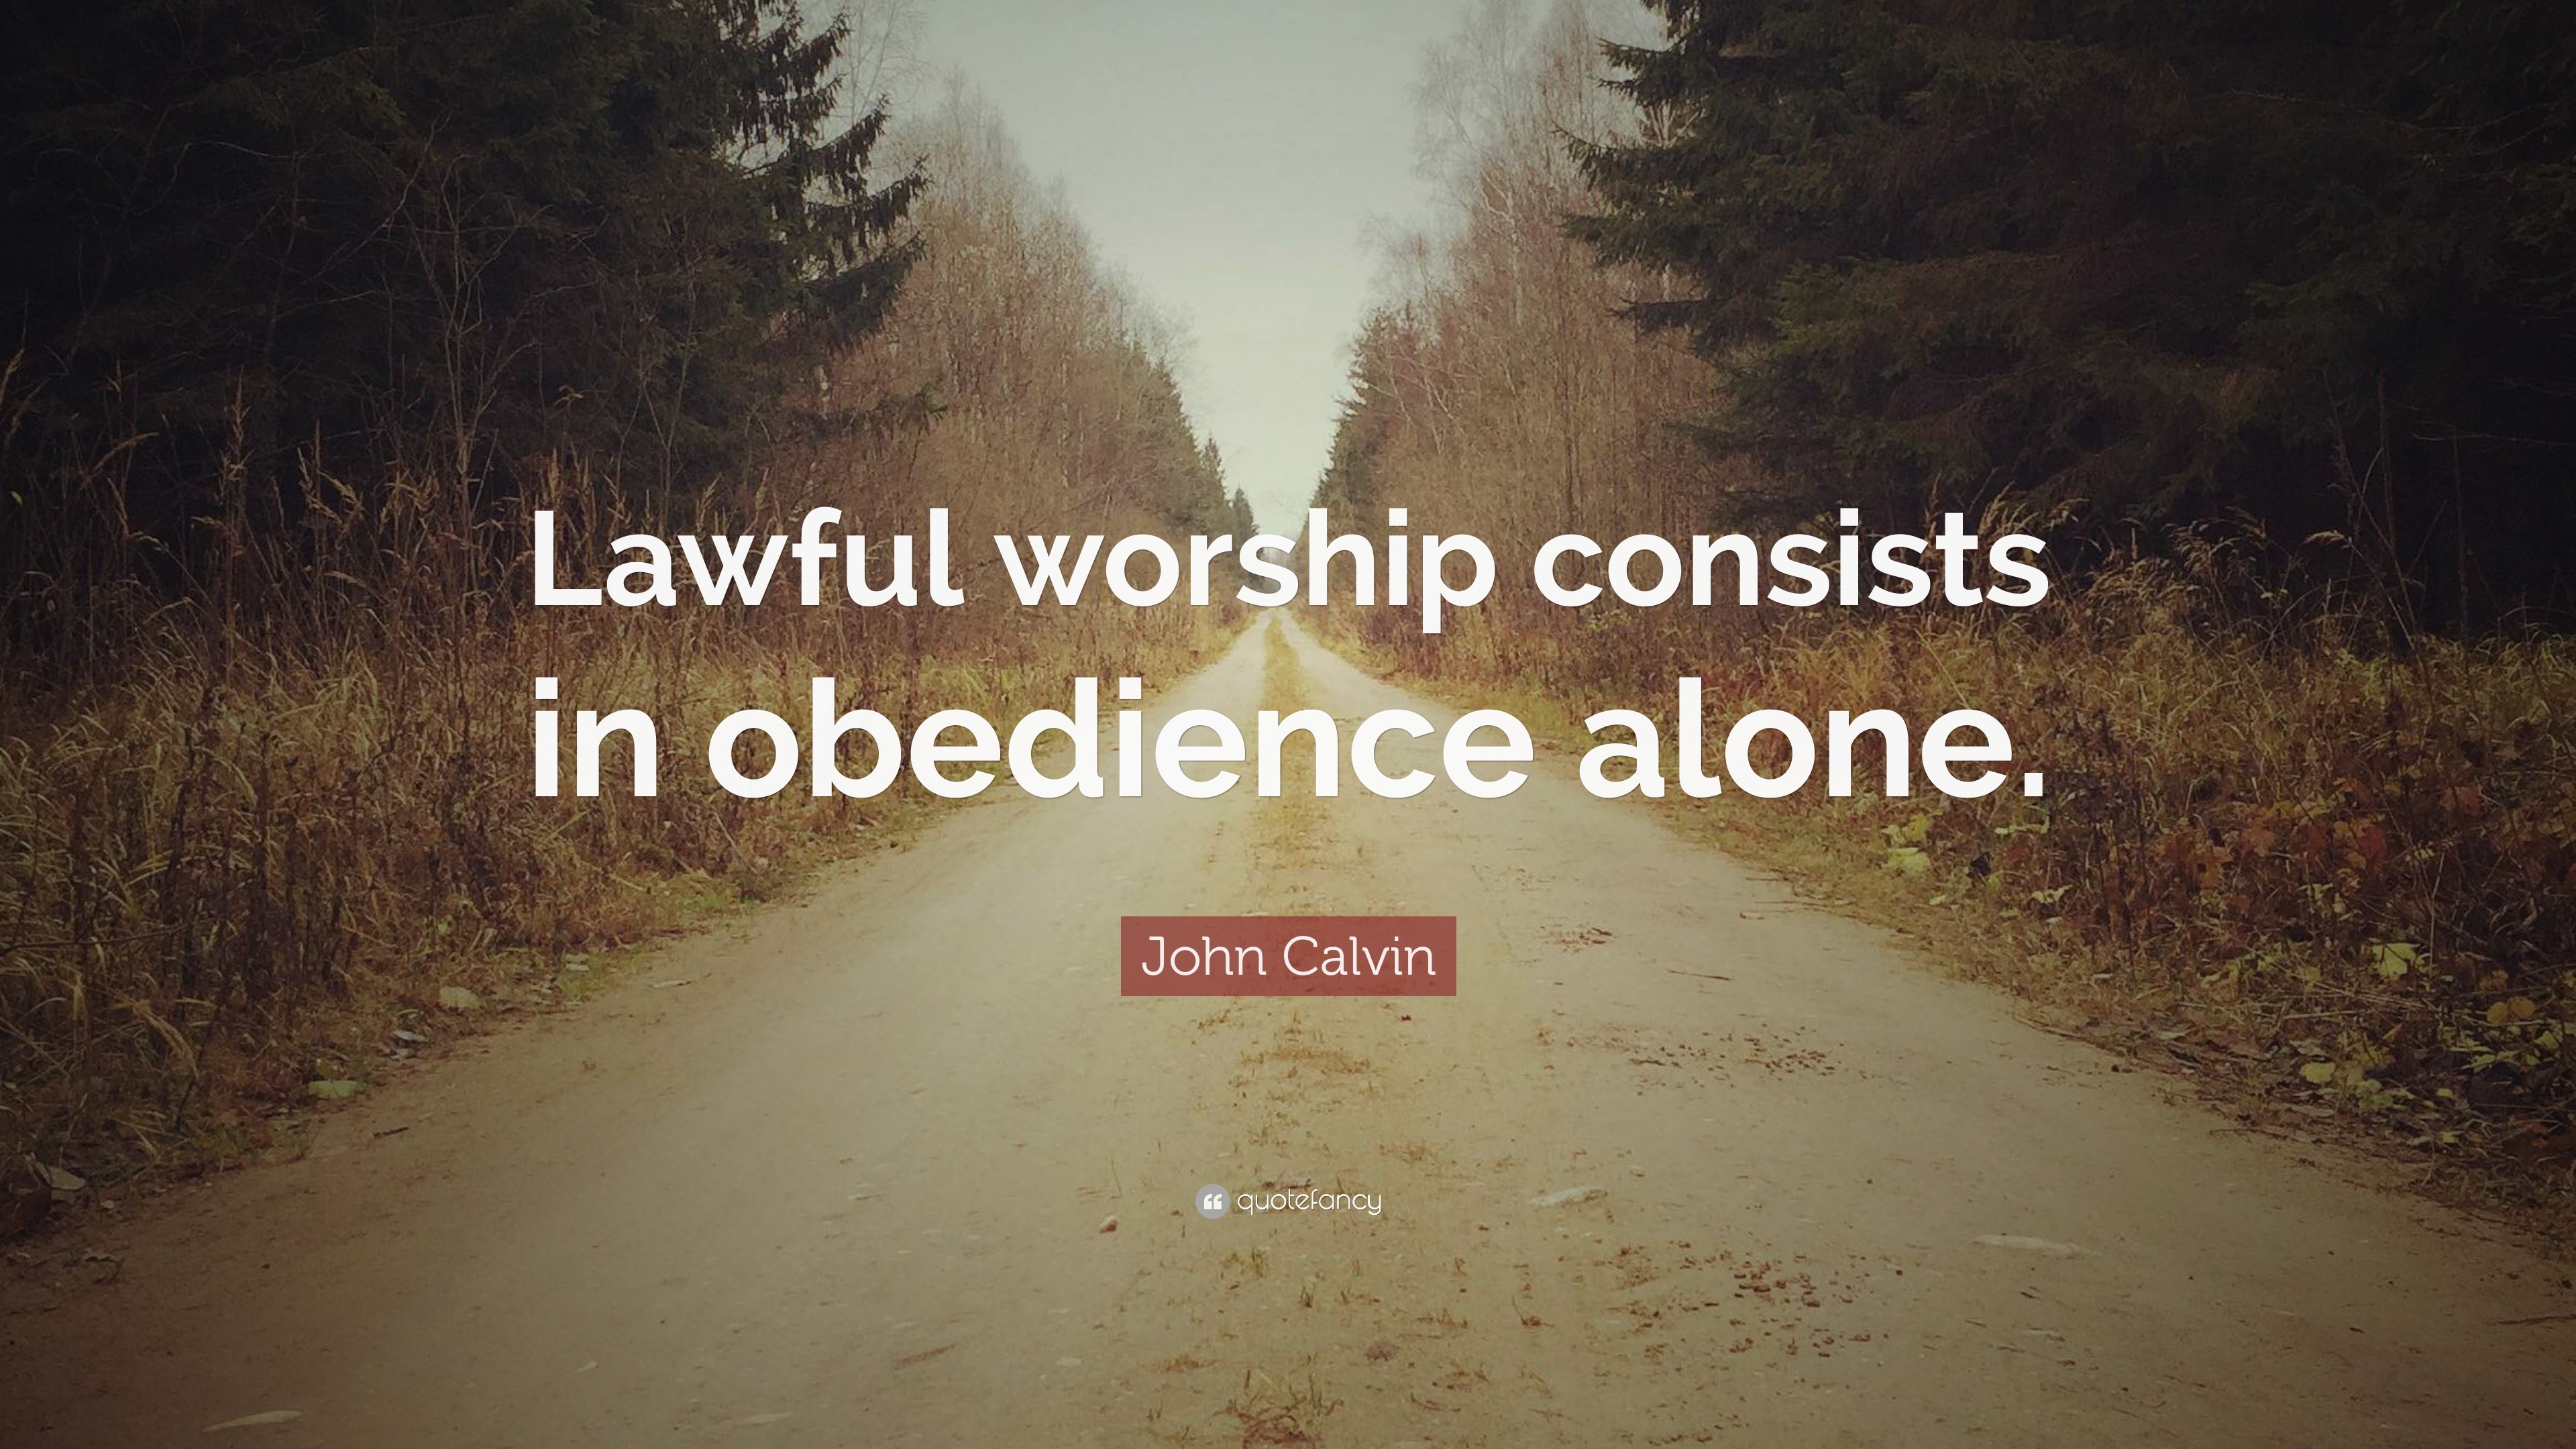 John Calvin Quote: “Lawful worship consists in obedience alone.”